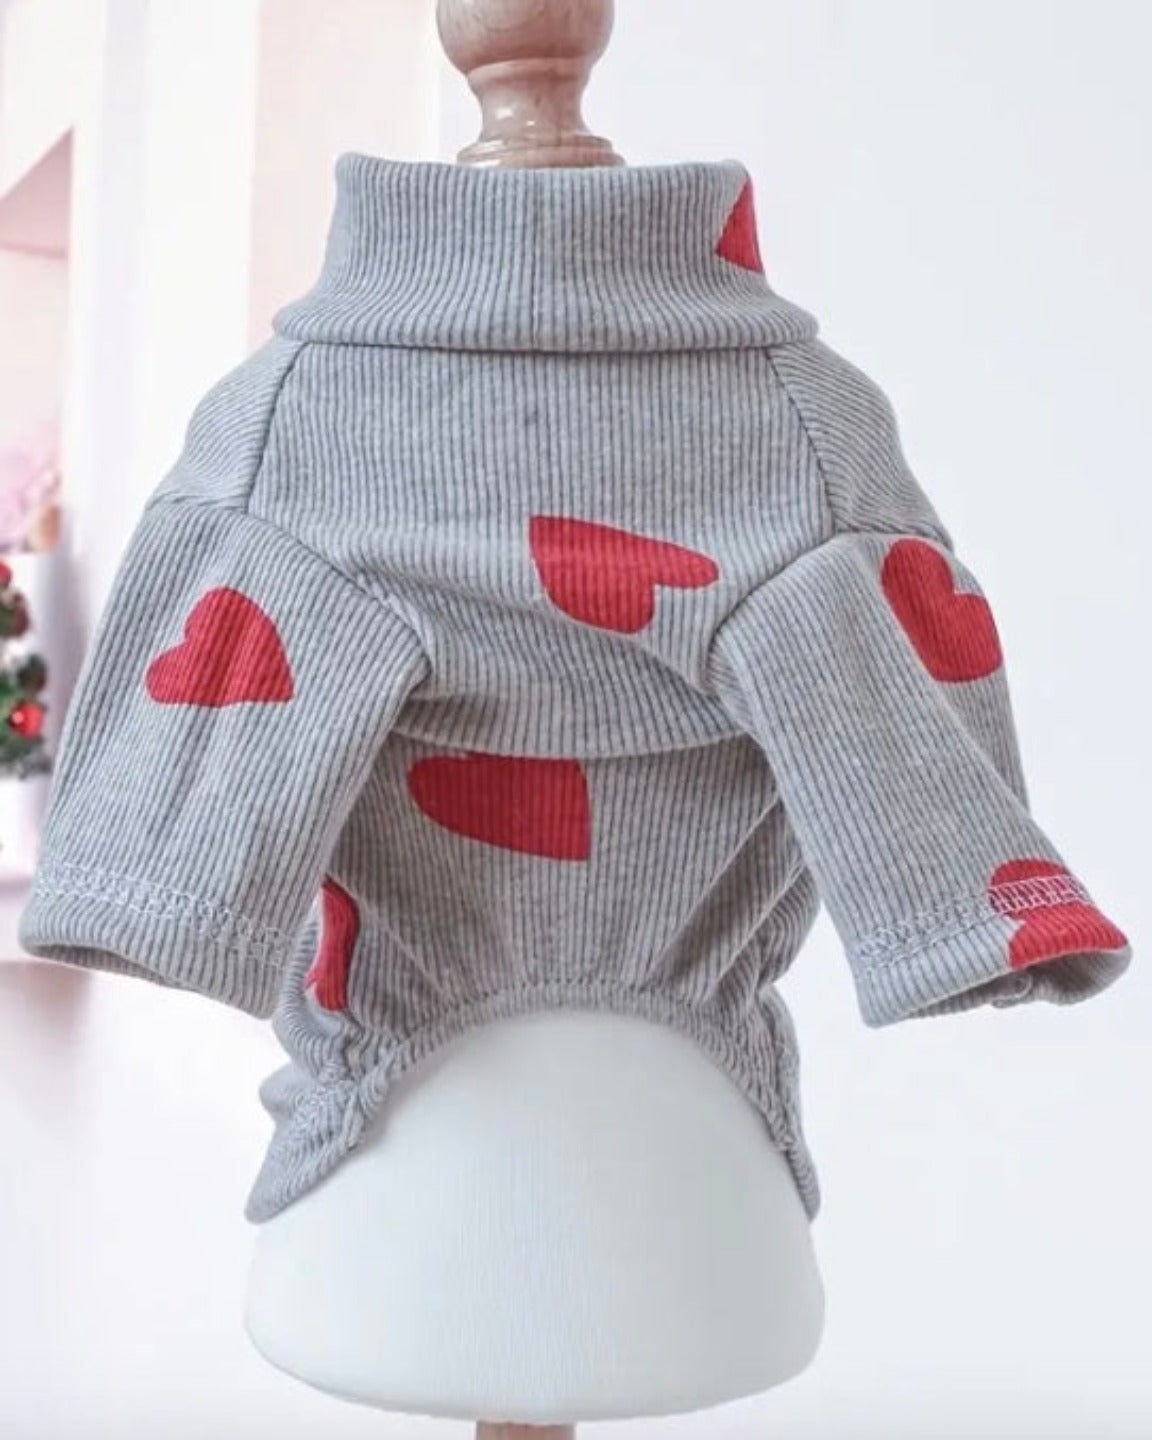 The heart sweater